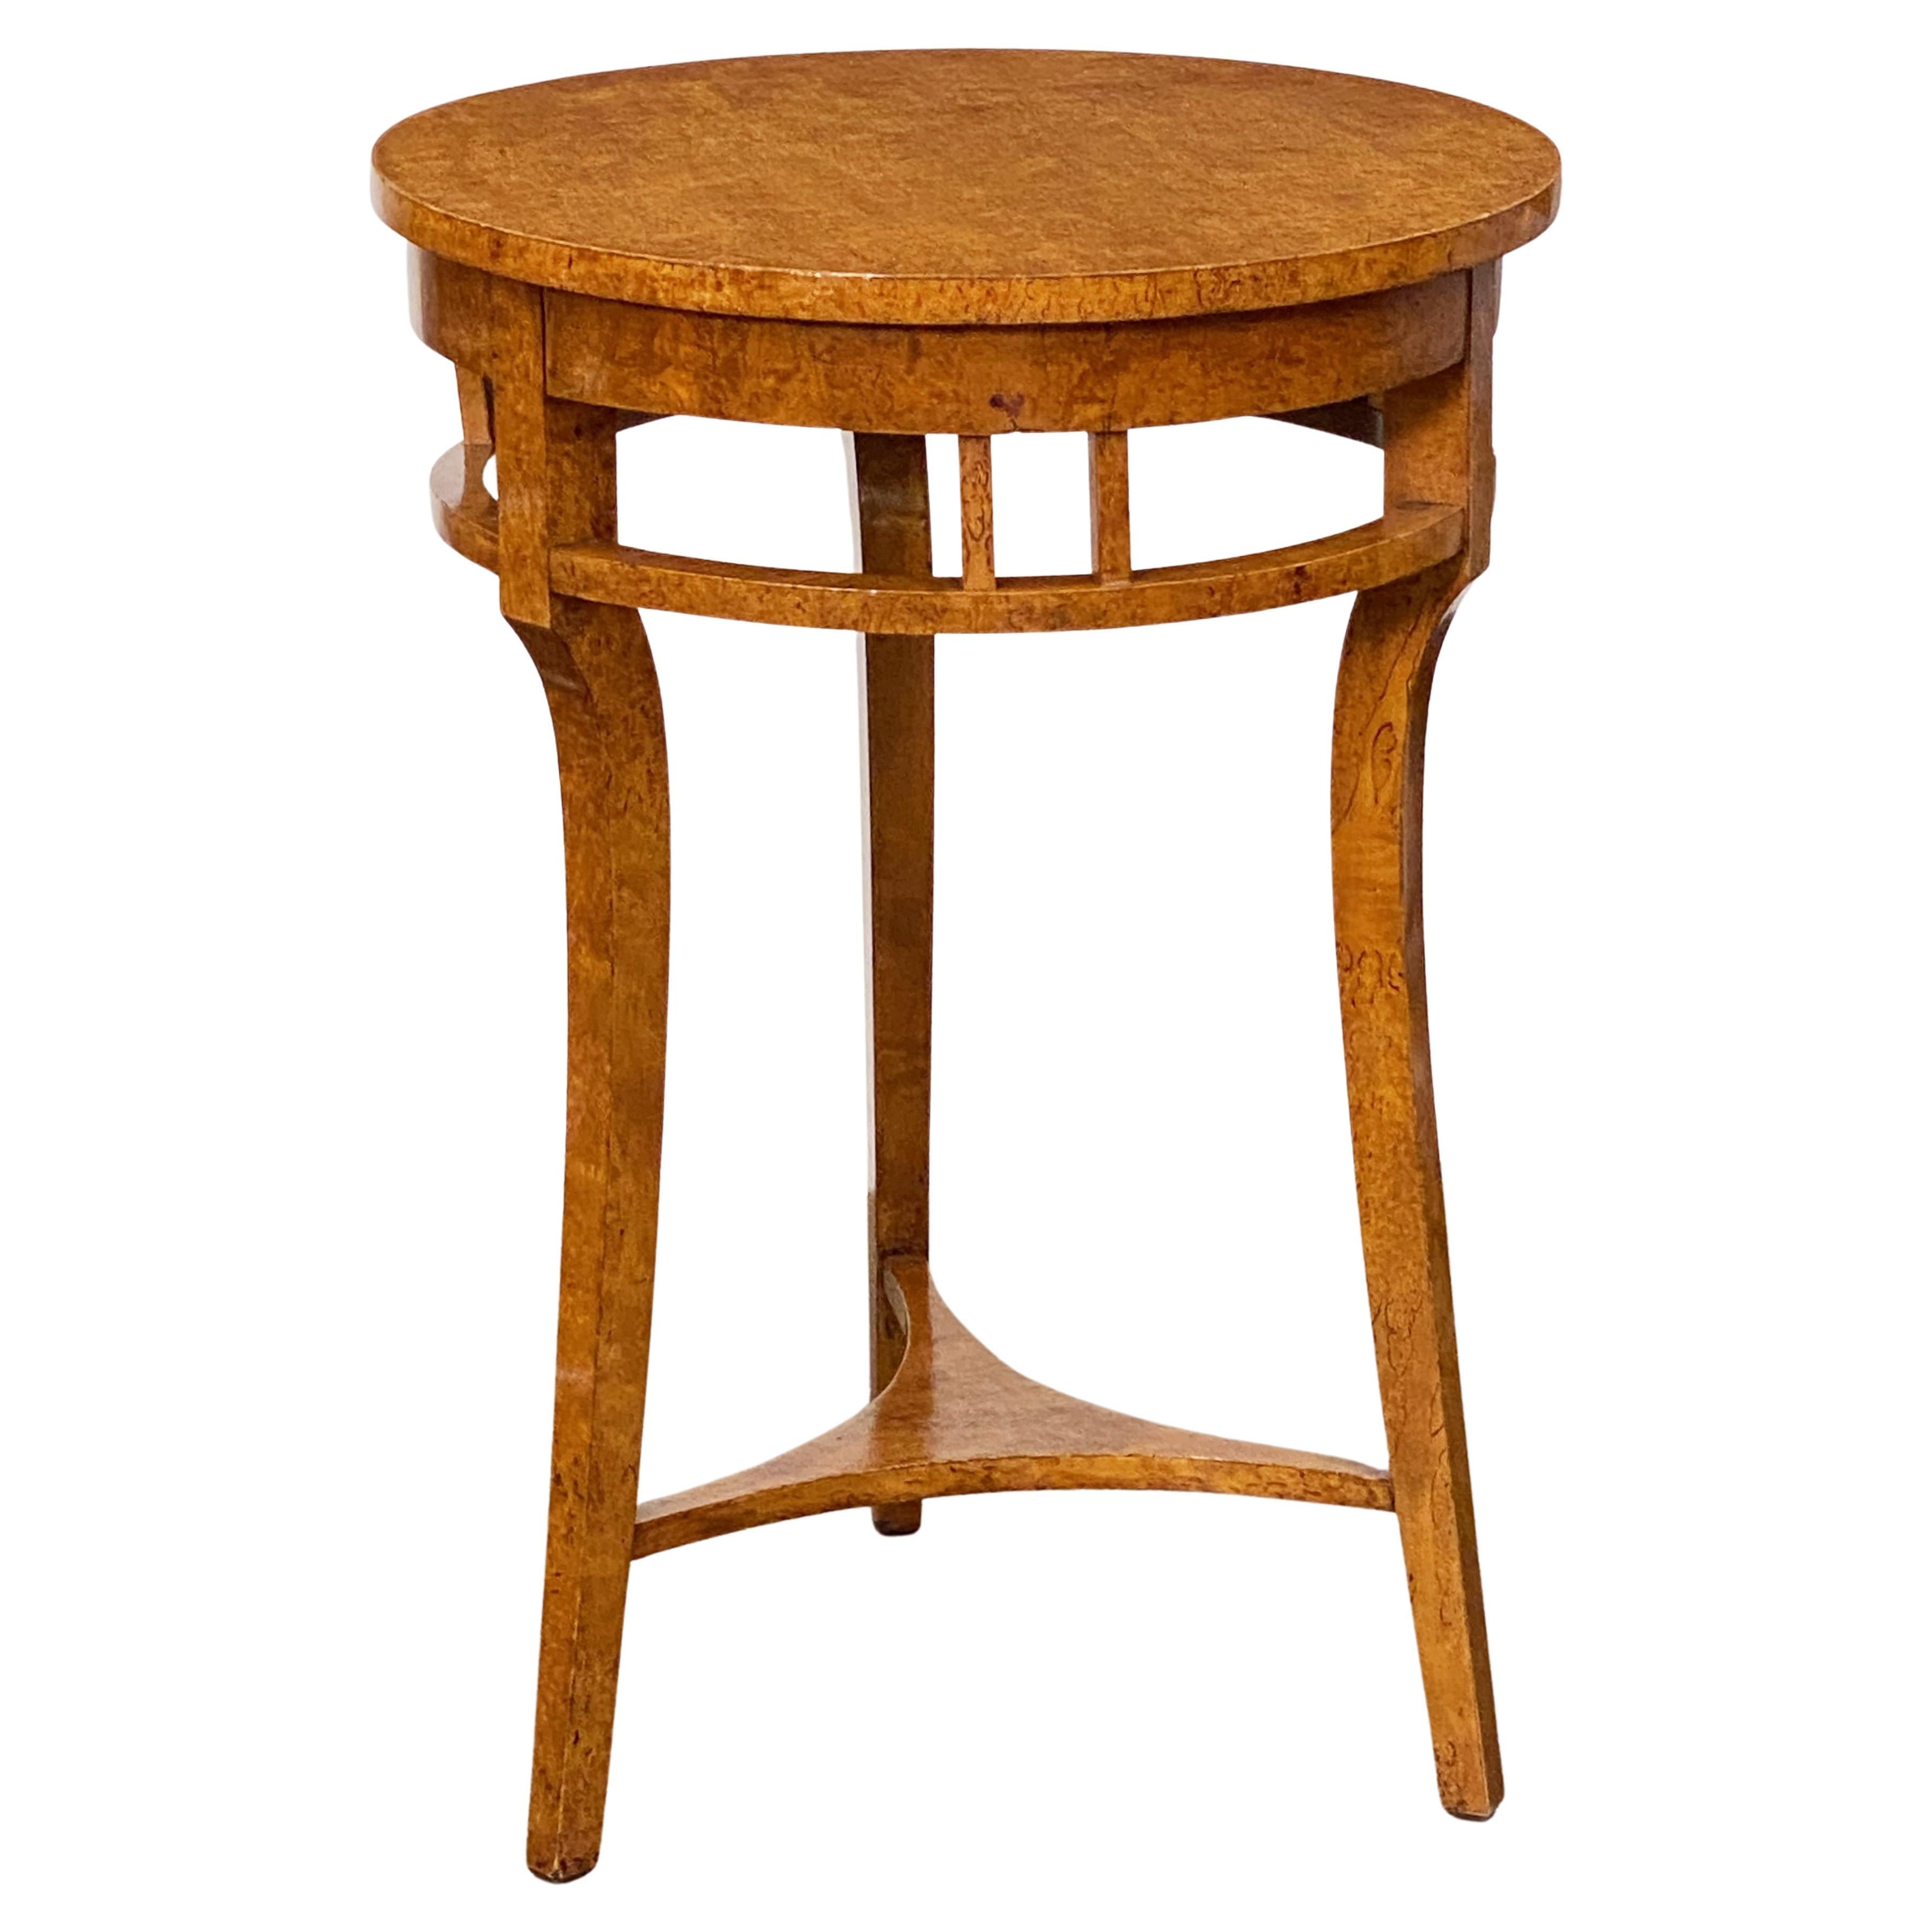 Russian Empire Occasional Table or Guéridon of Karelian Spalted Birch